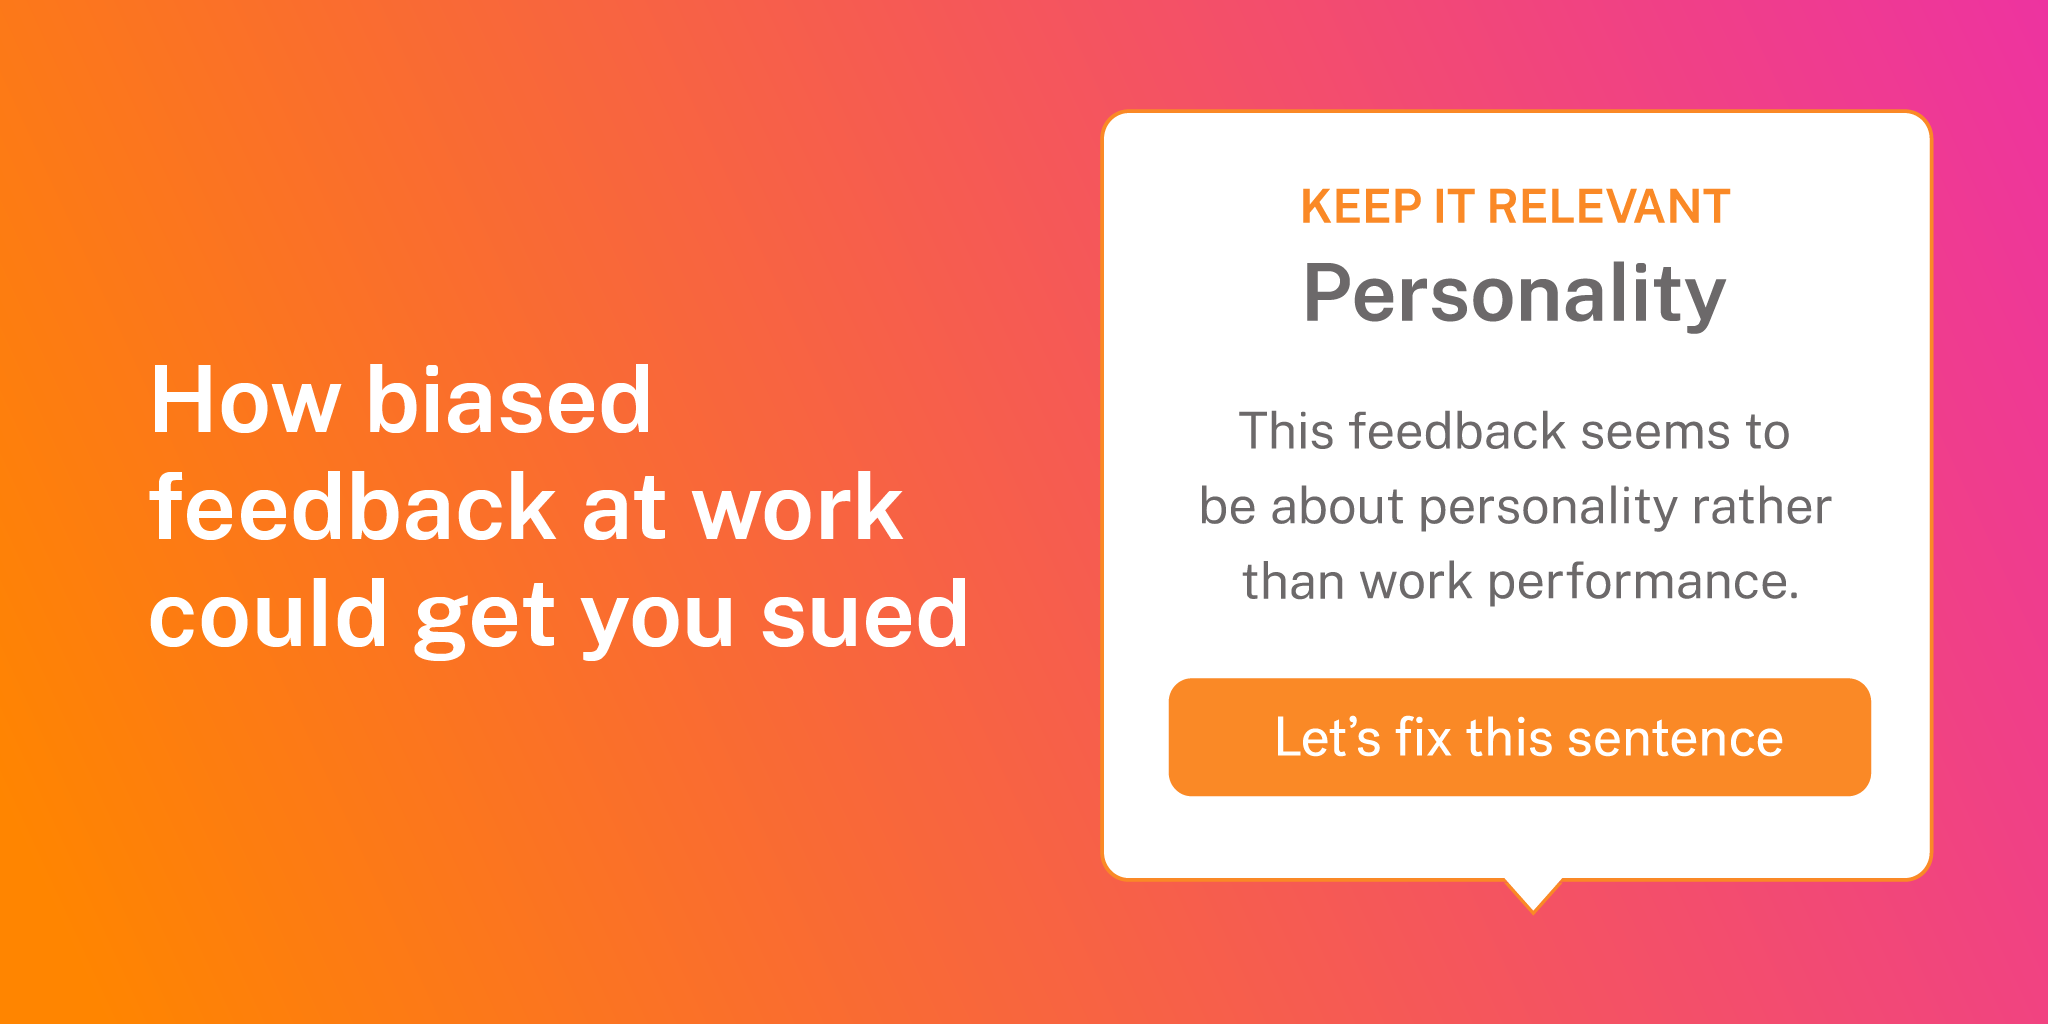 Orange and pink image. How biased feedback could get you sued at work words